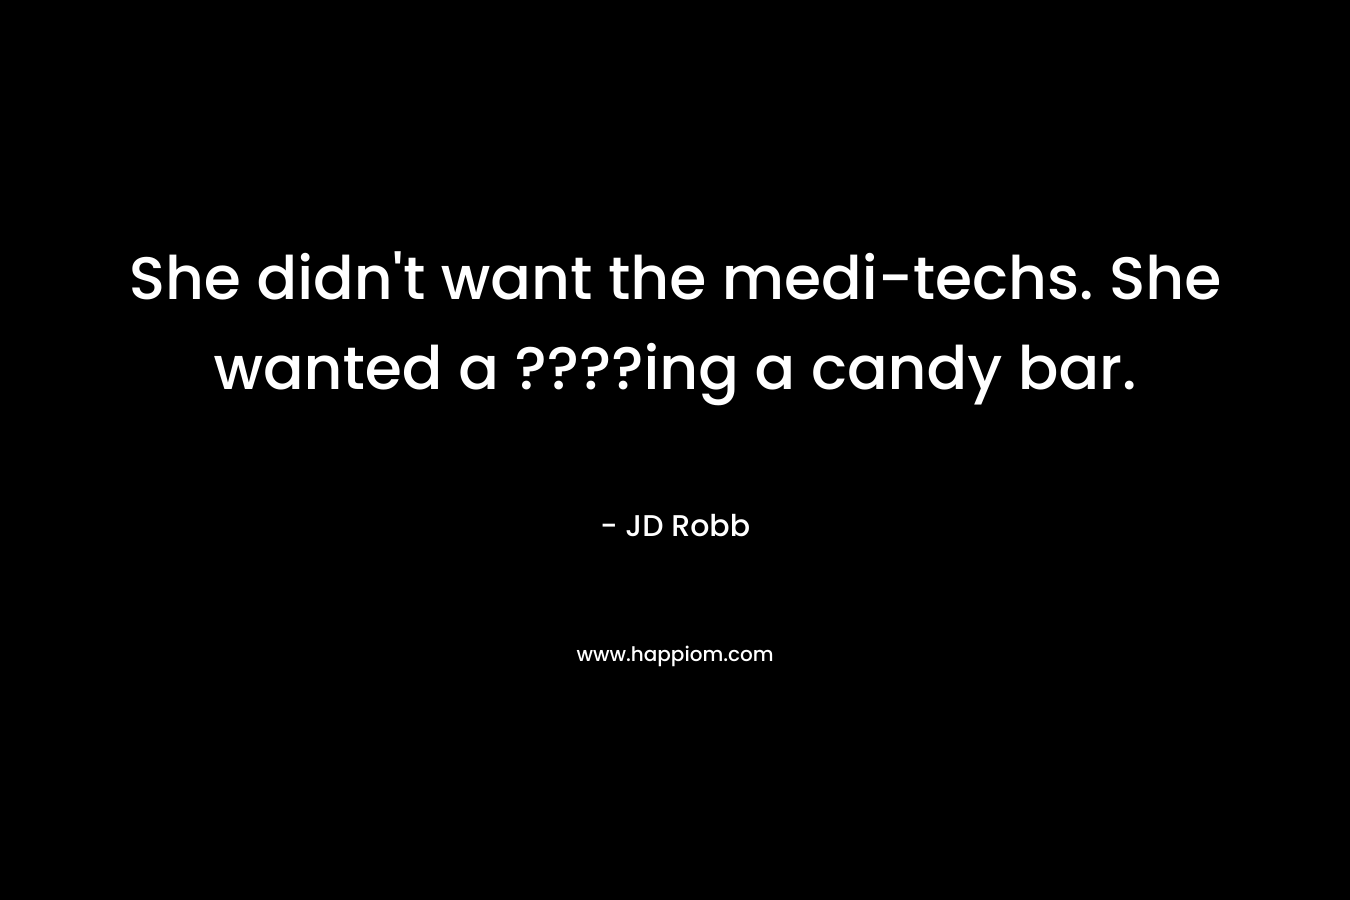 She didn’t want the medi-techs. She wanted a ????ing a candy bar. – JD Robb